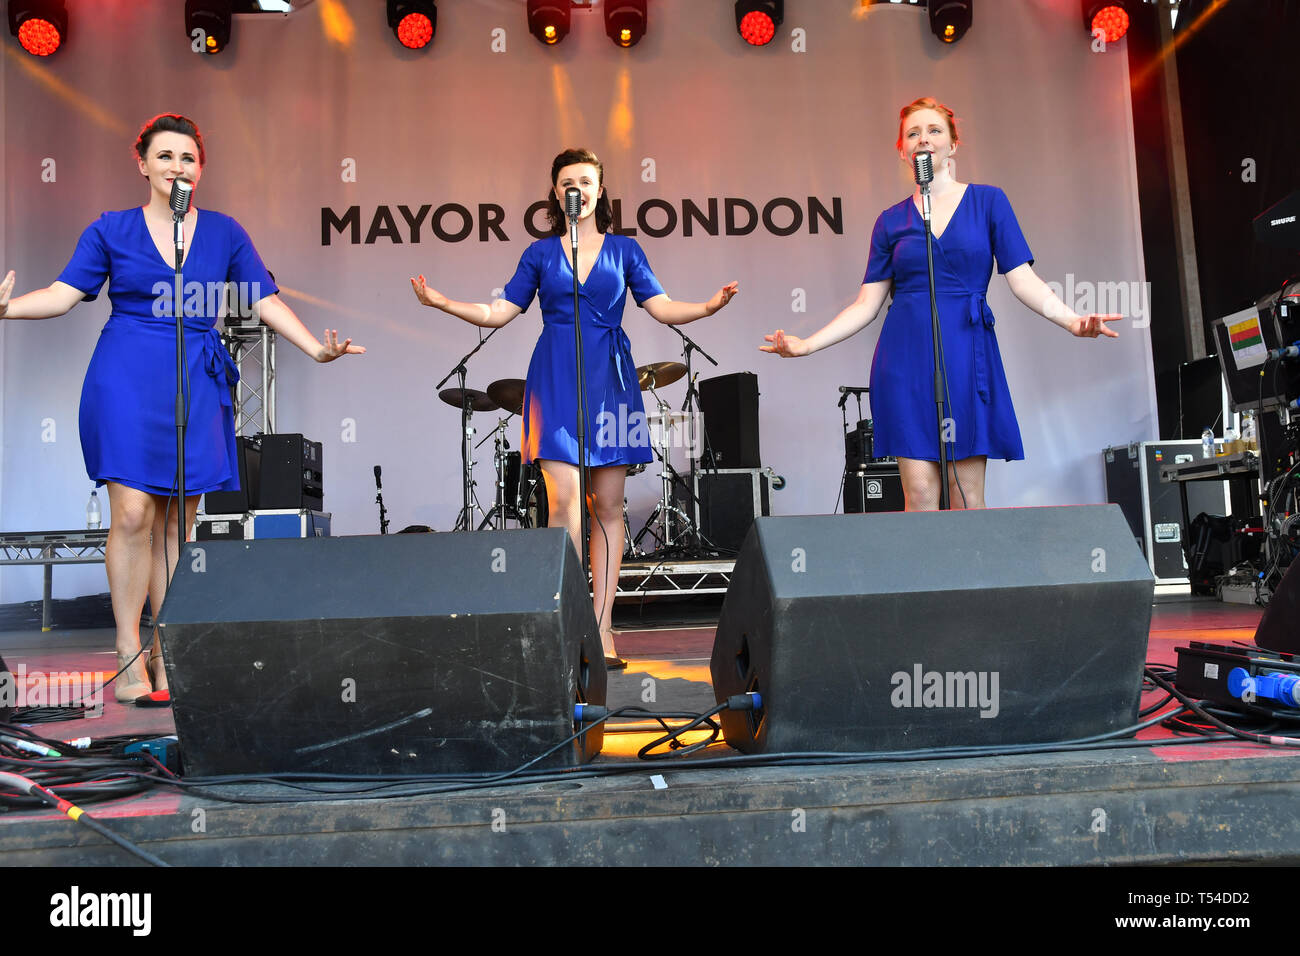 Rooftop Trio performs marriage at the Feast of St George to celebrate English culture with music and English food stalls in Trafalgar Square on 20 April 2019, London, UK. Stock Photo